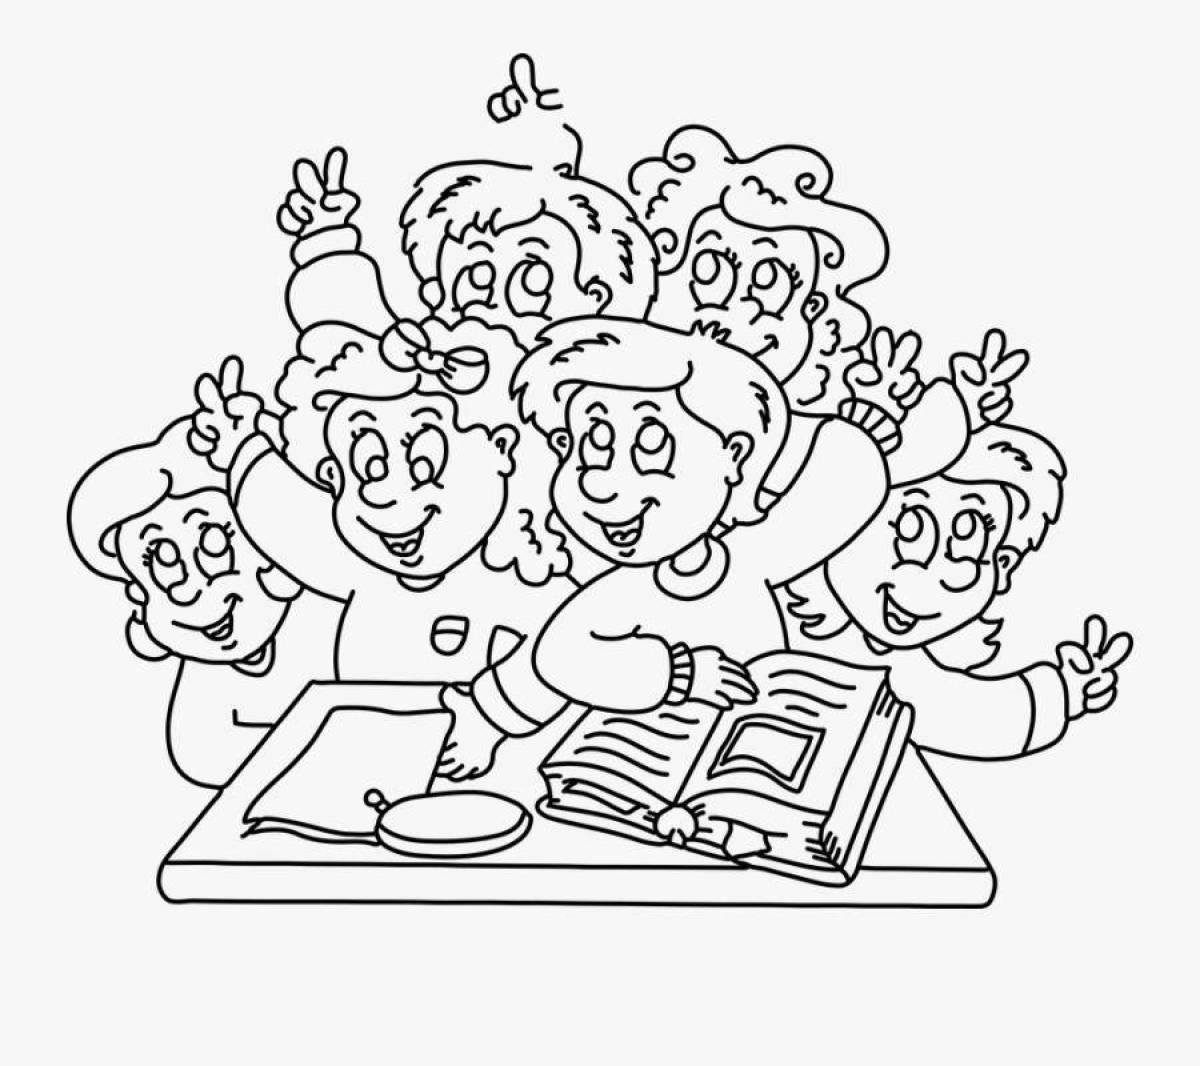 Glowing student's day coloring page